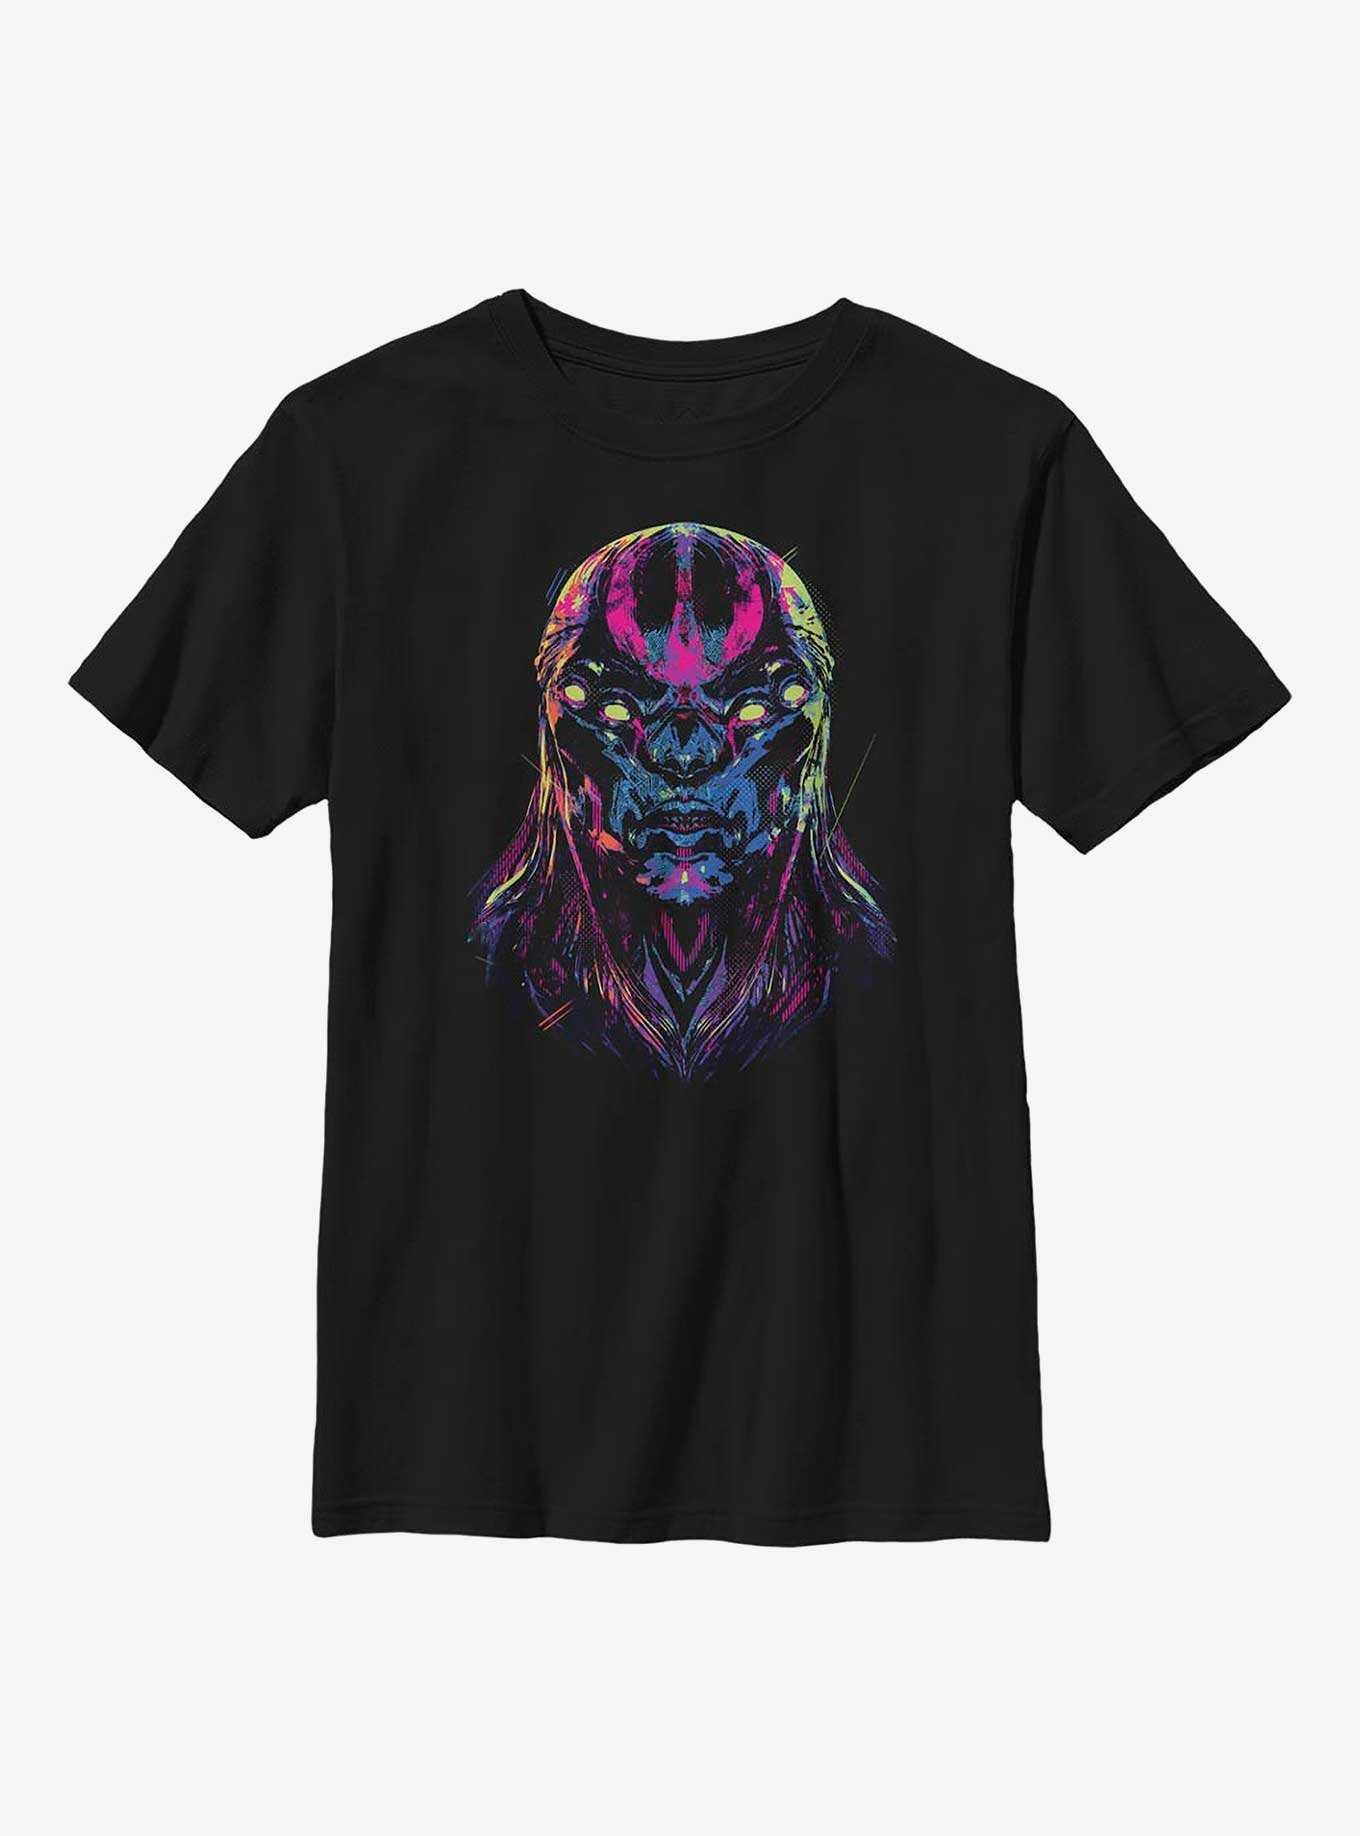 Marvel The Eternals Kro Devious Face Youth T-Shirt, , hi-res